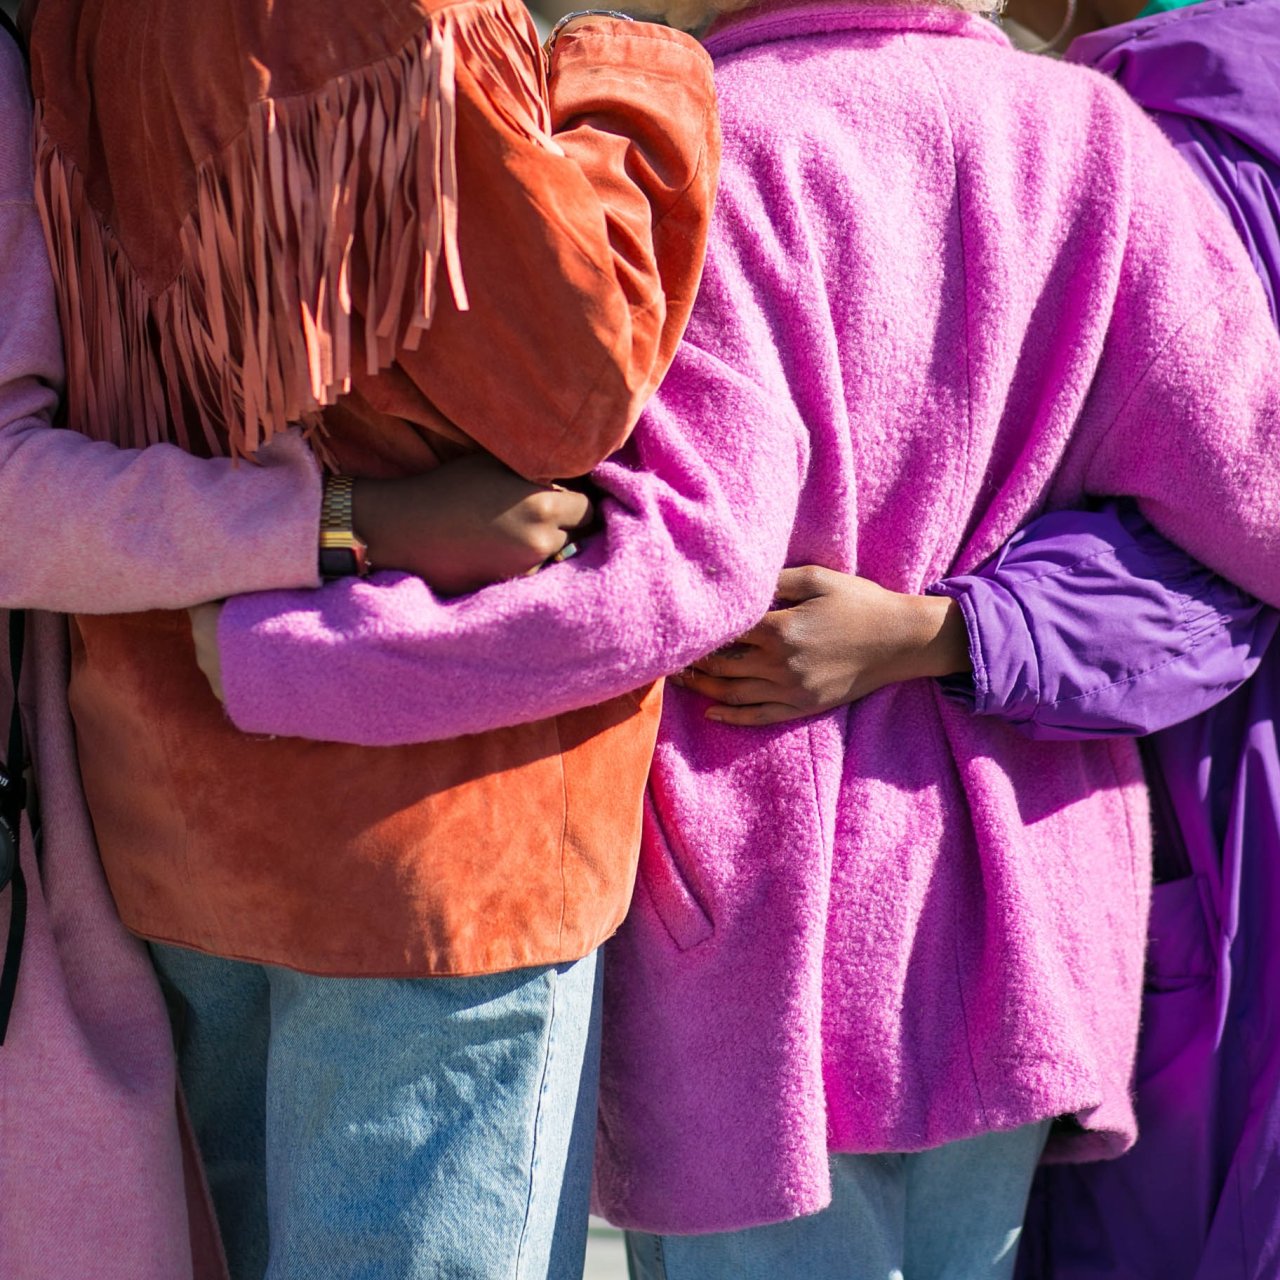 Woman in pink, arms around each other.